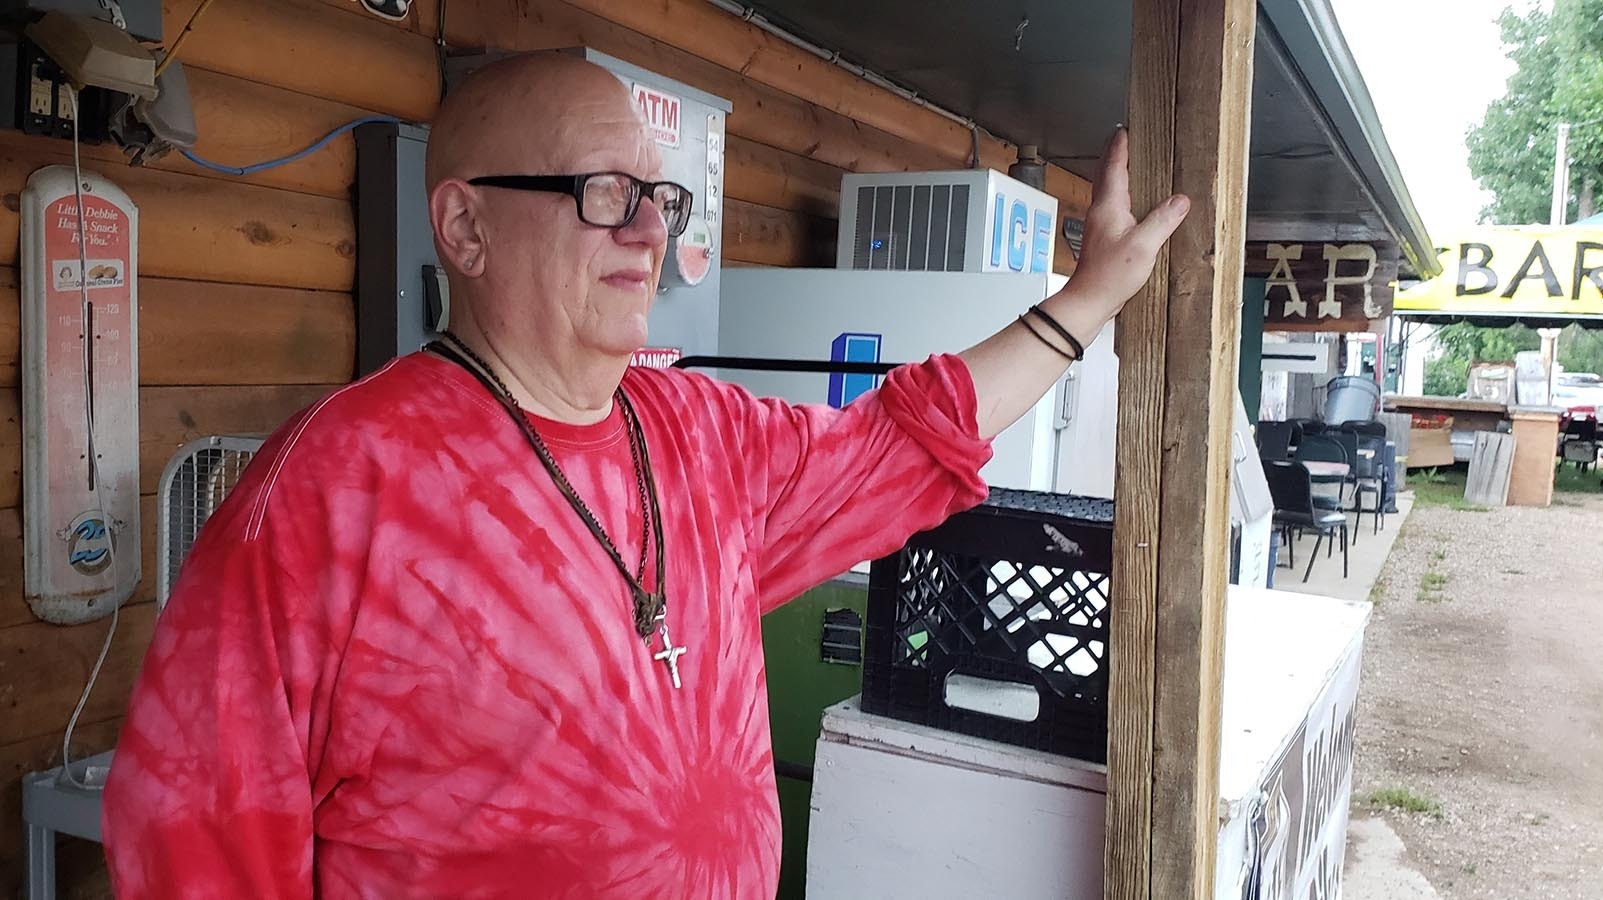 Rain isn't dampening spirits for business owners like Michael Dean Coronato owner of the Ponderosa Cafe. He's been getting ready for the month of August since December.